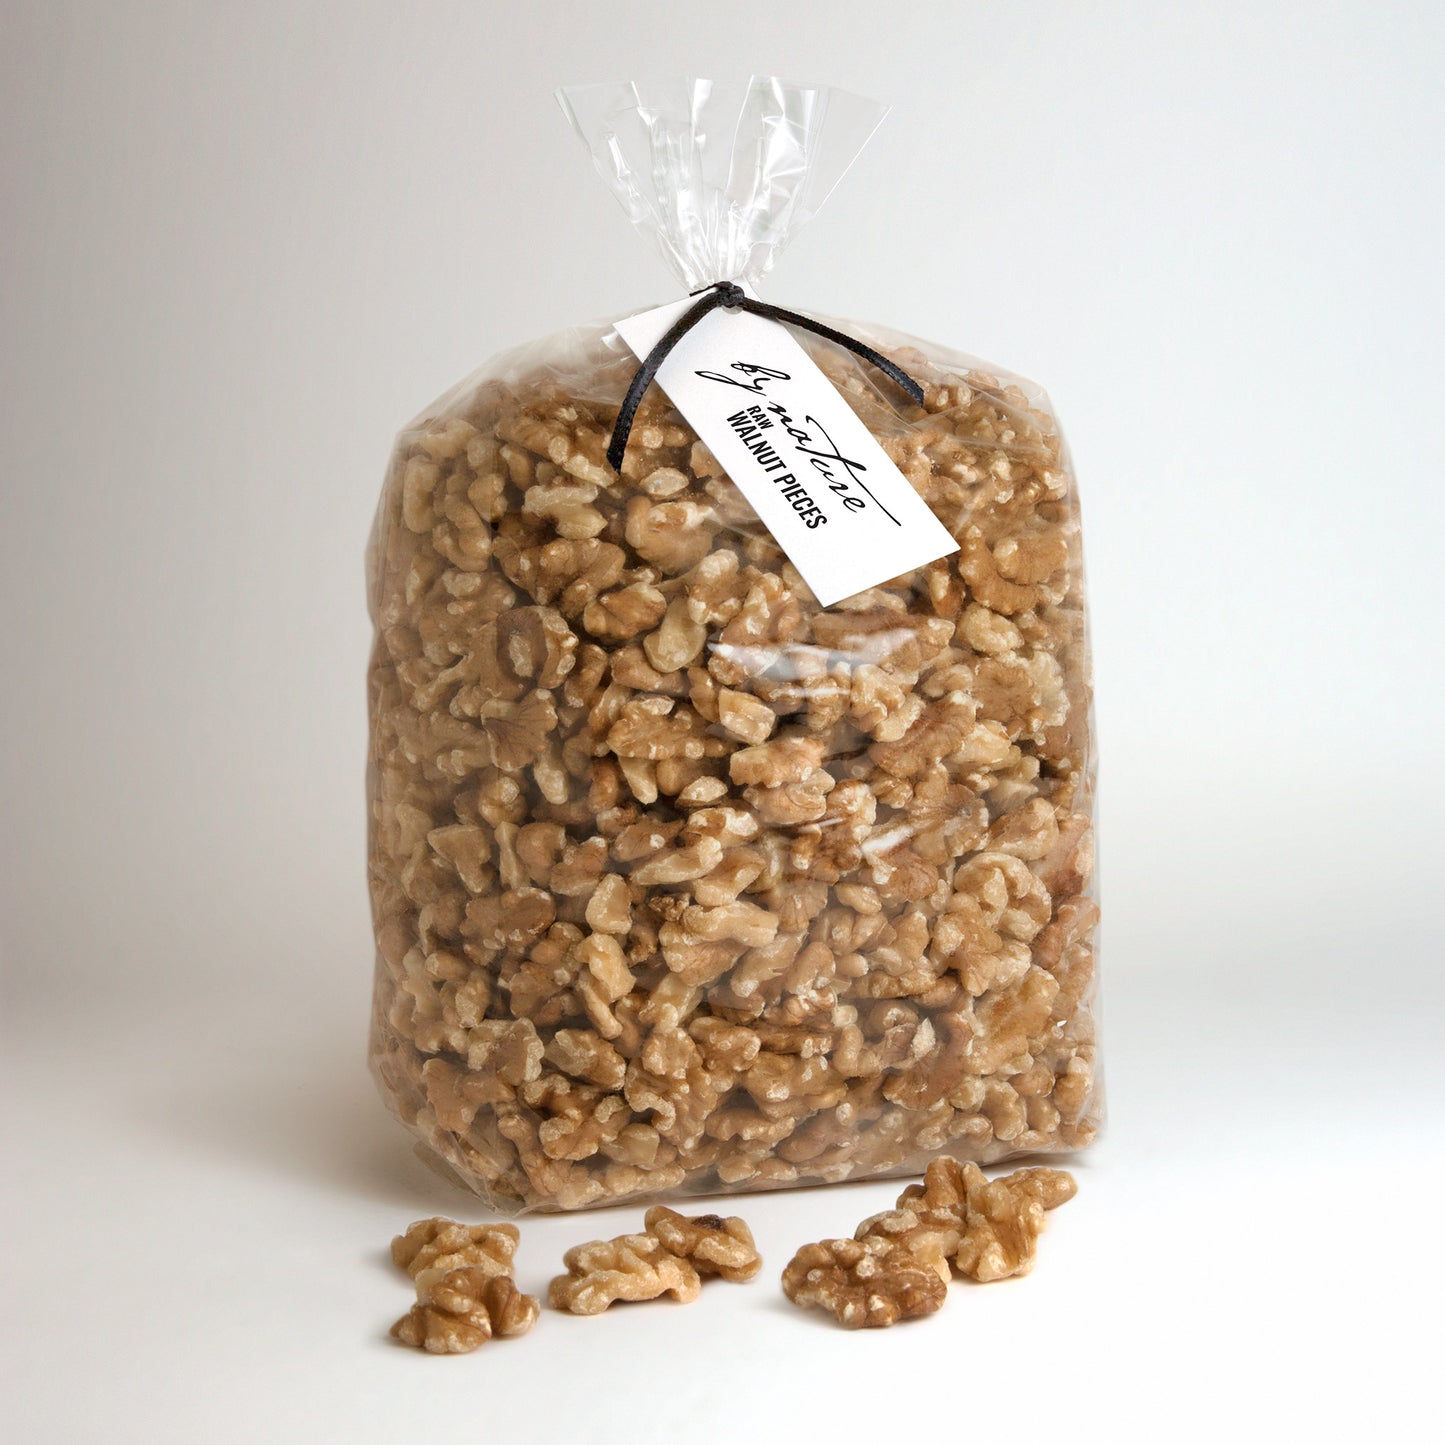 BY NATURE Walnut Pieces, 1kg - raw.